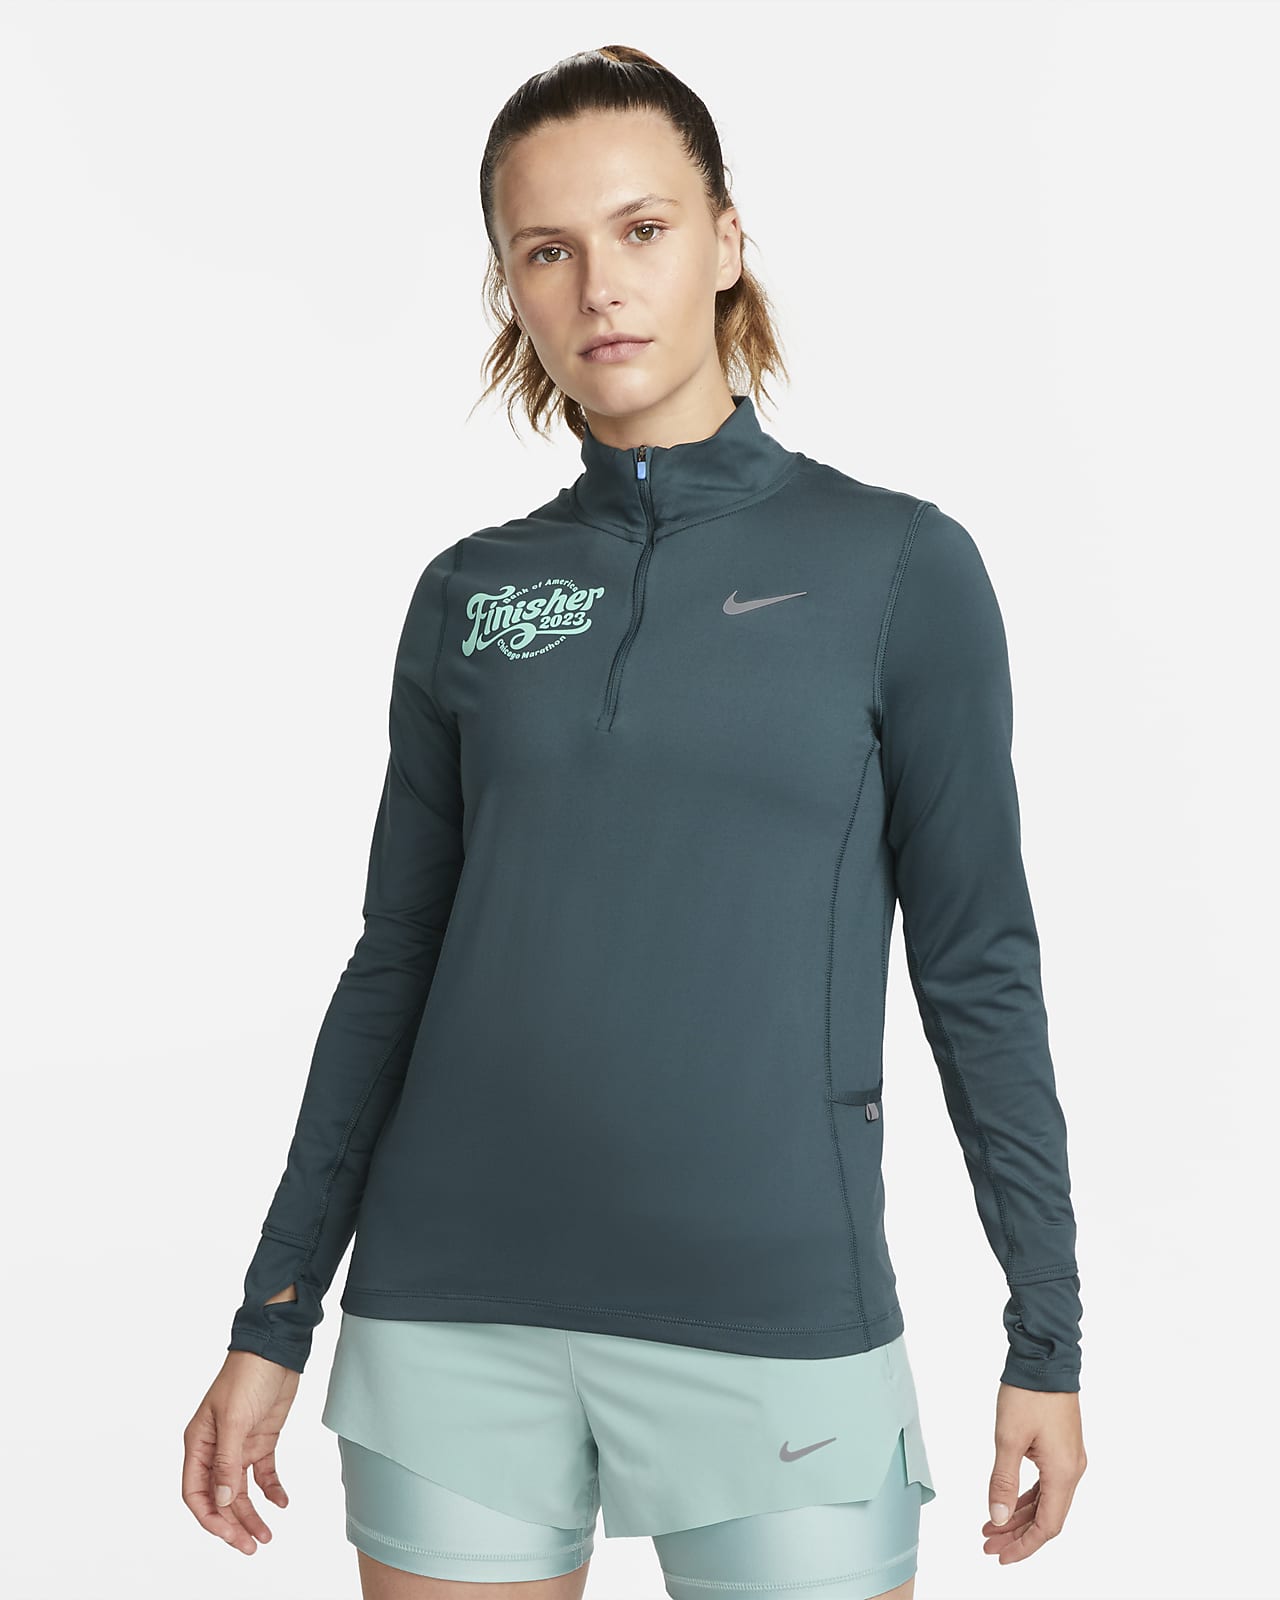 https://static.nike.com/a/images/t_PDP_1280_v1/f_auto,q_auto:eco/71c5107f-6442-4f34-b371-6a15e61c8e0a/dri-fit-element-womens-1-2-zip-running-top-0sHf3R.png